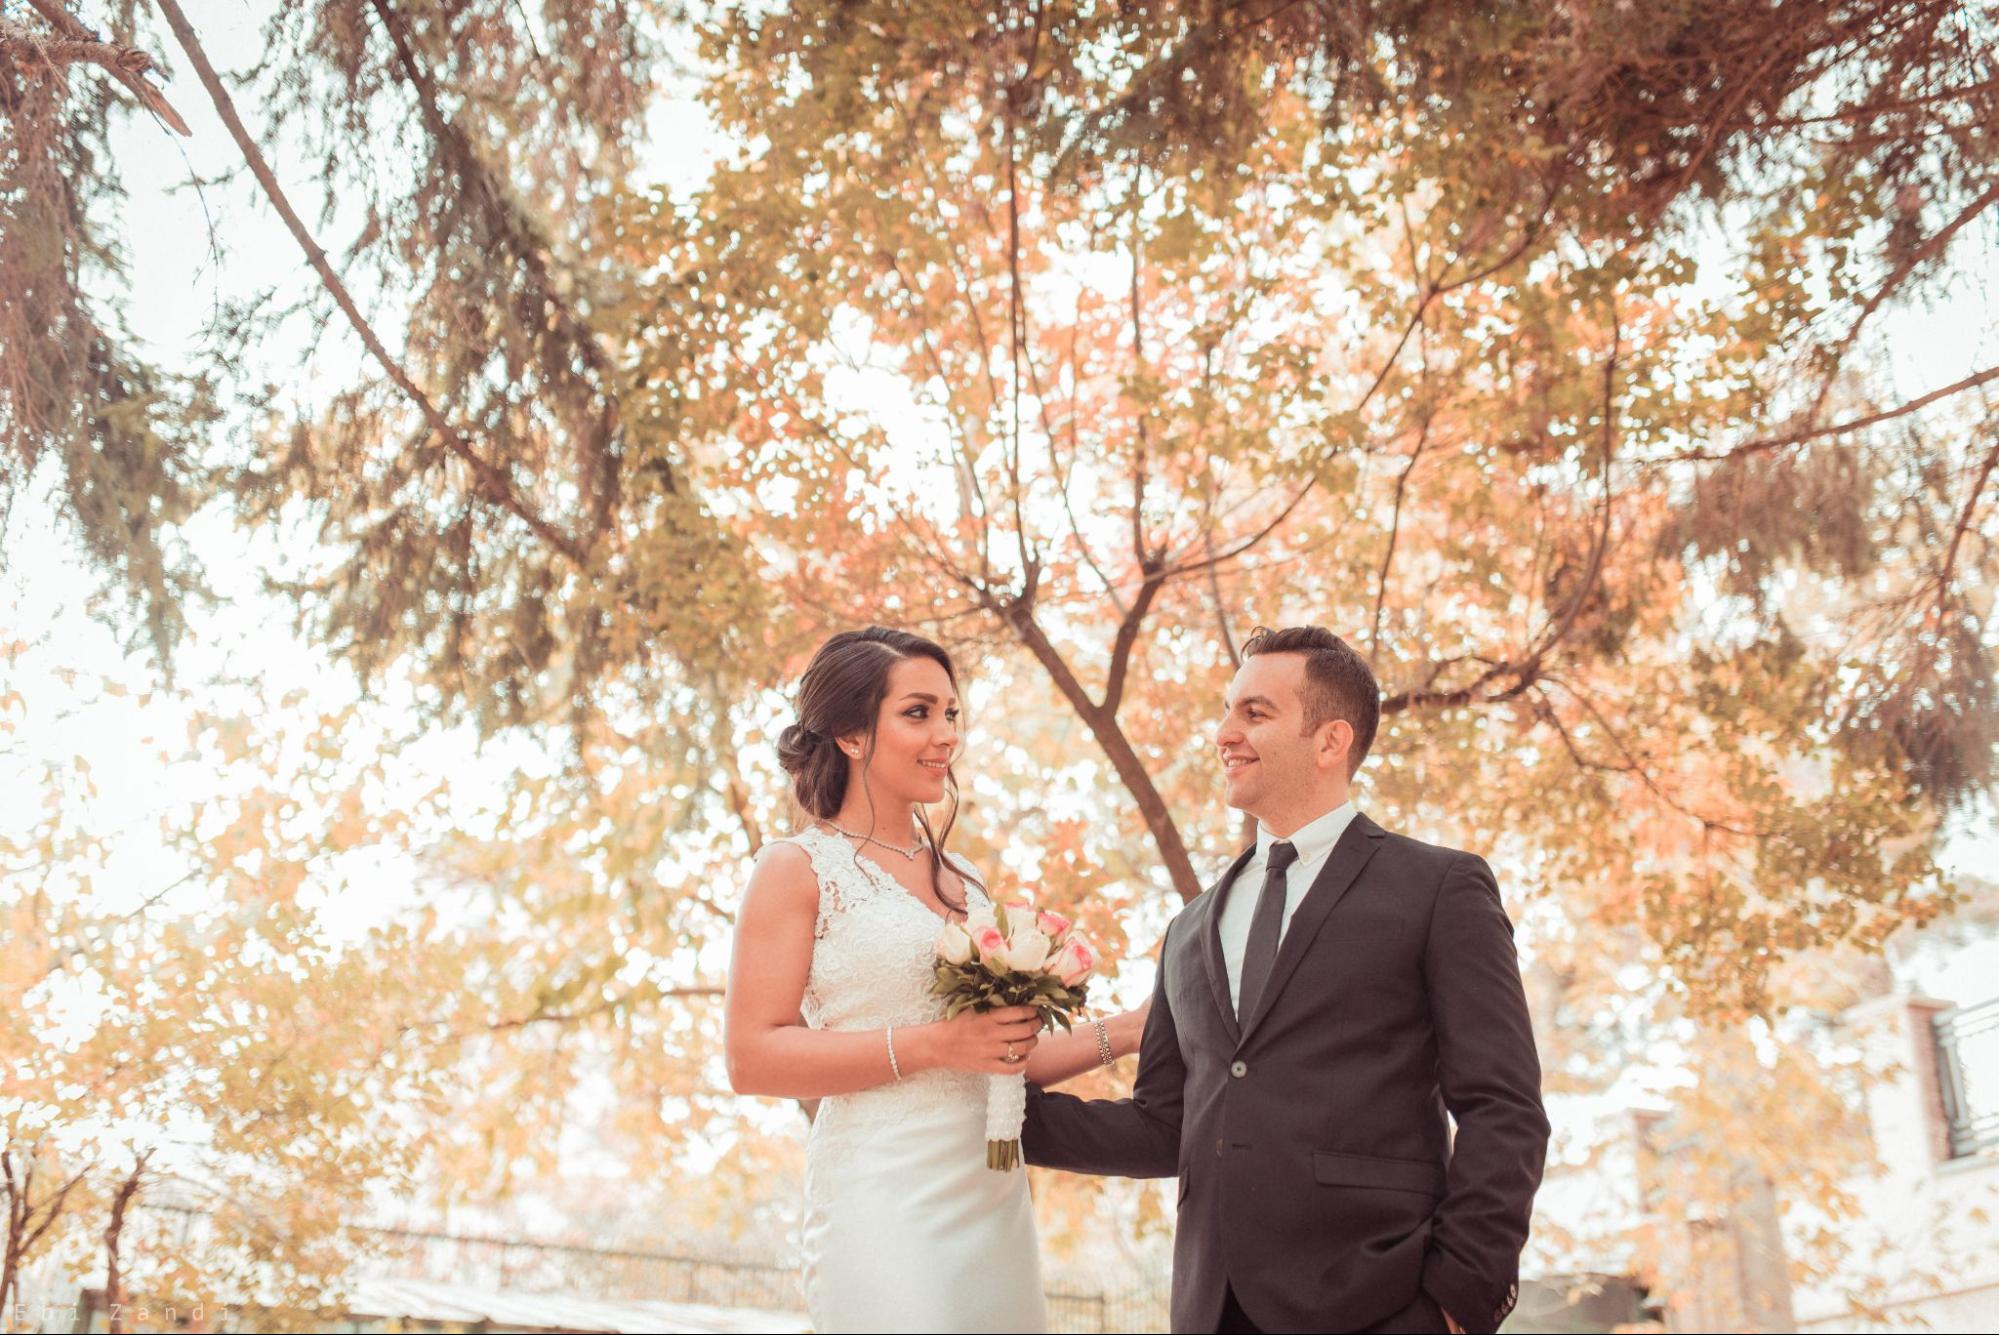 A newly married couple smiling at each other under trees in the fall.